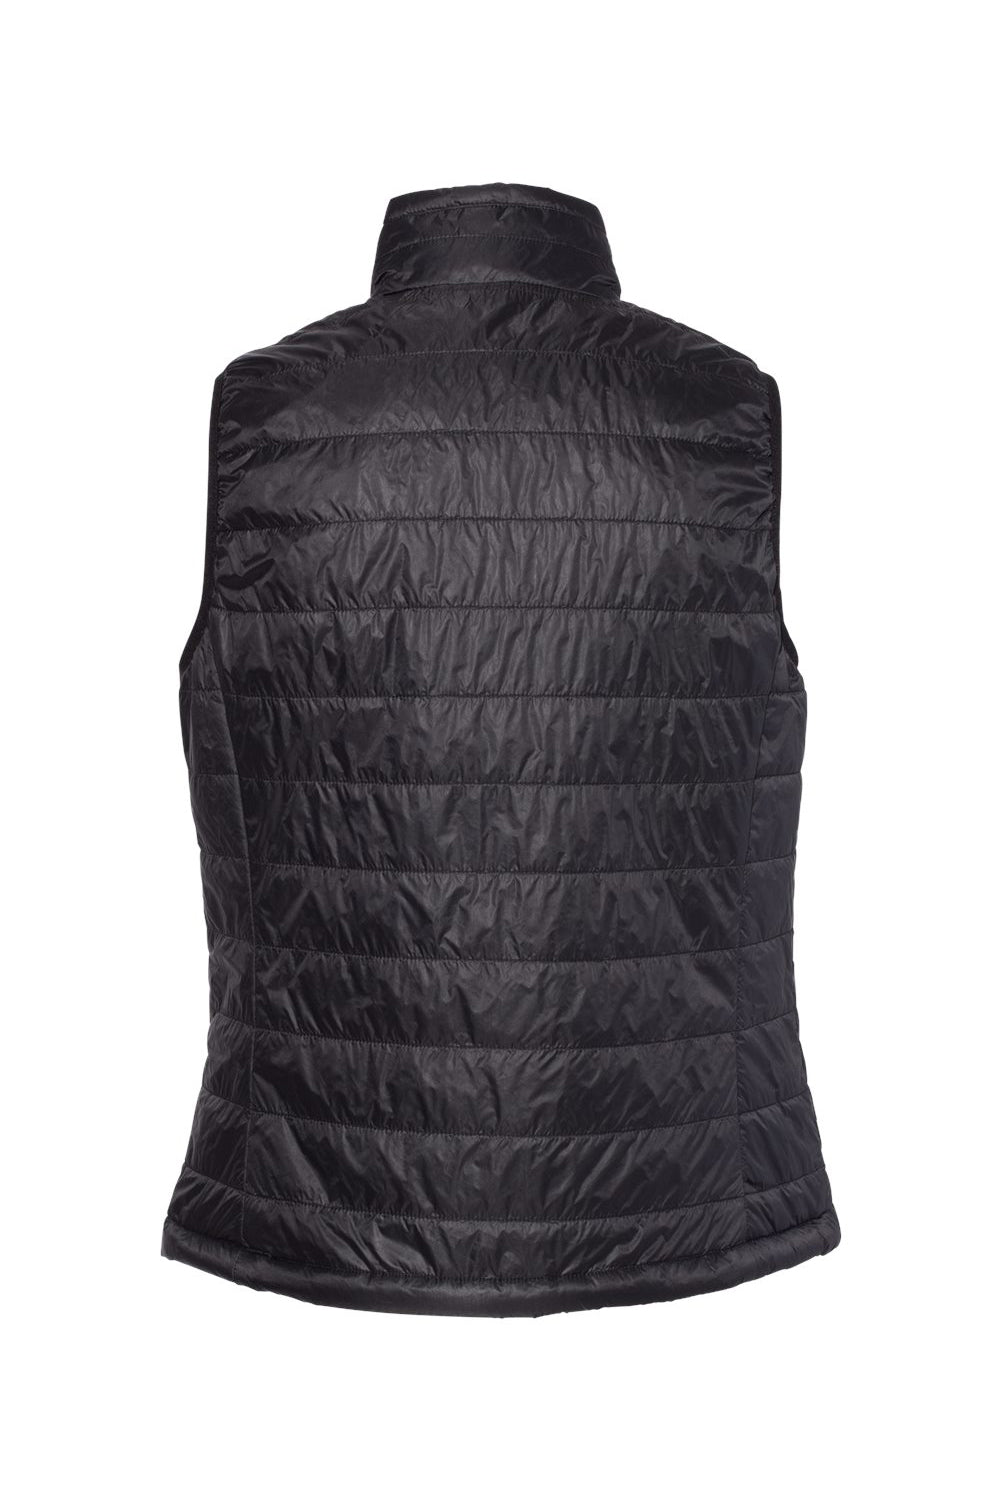 Independent Trading Co. EXP220PFV Womens Full Zip Puffer Vest Black Flat Back